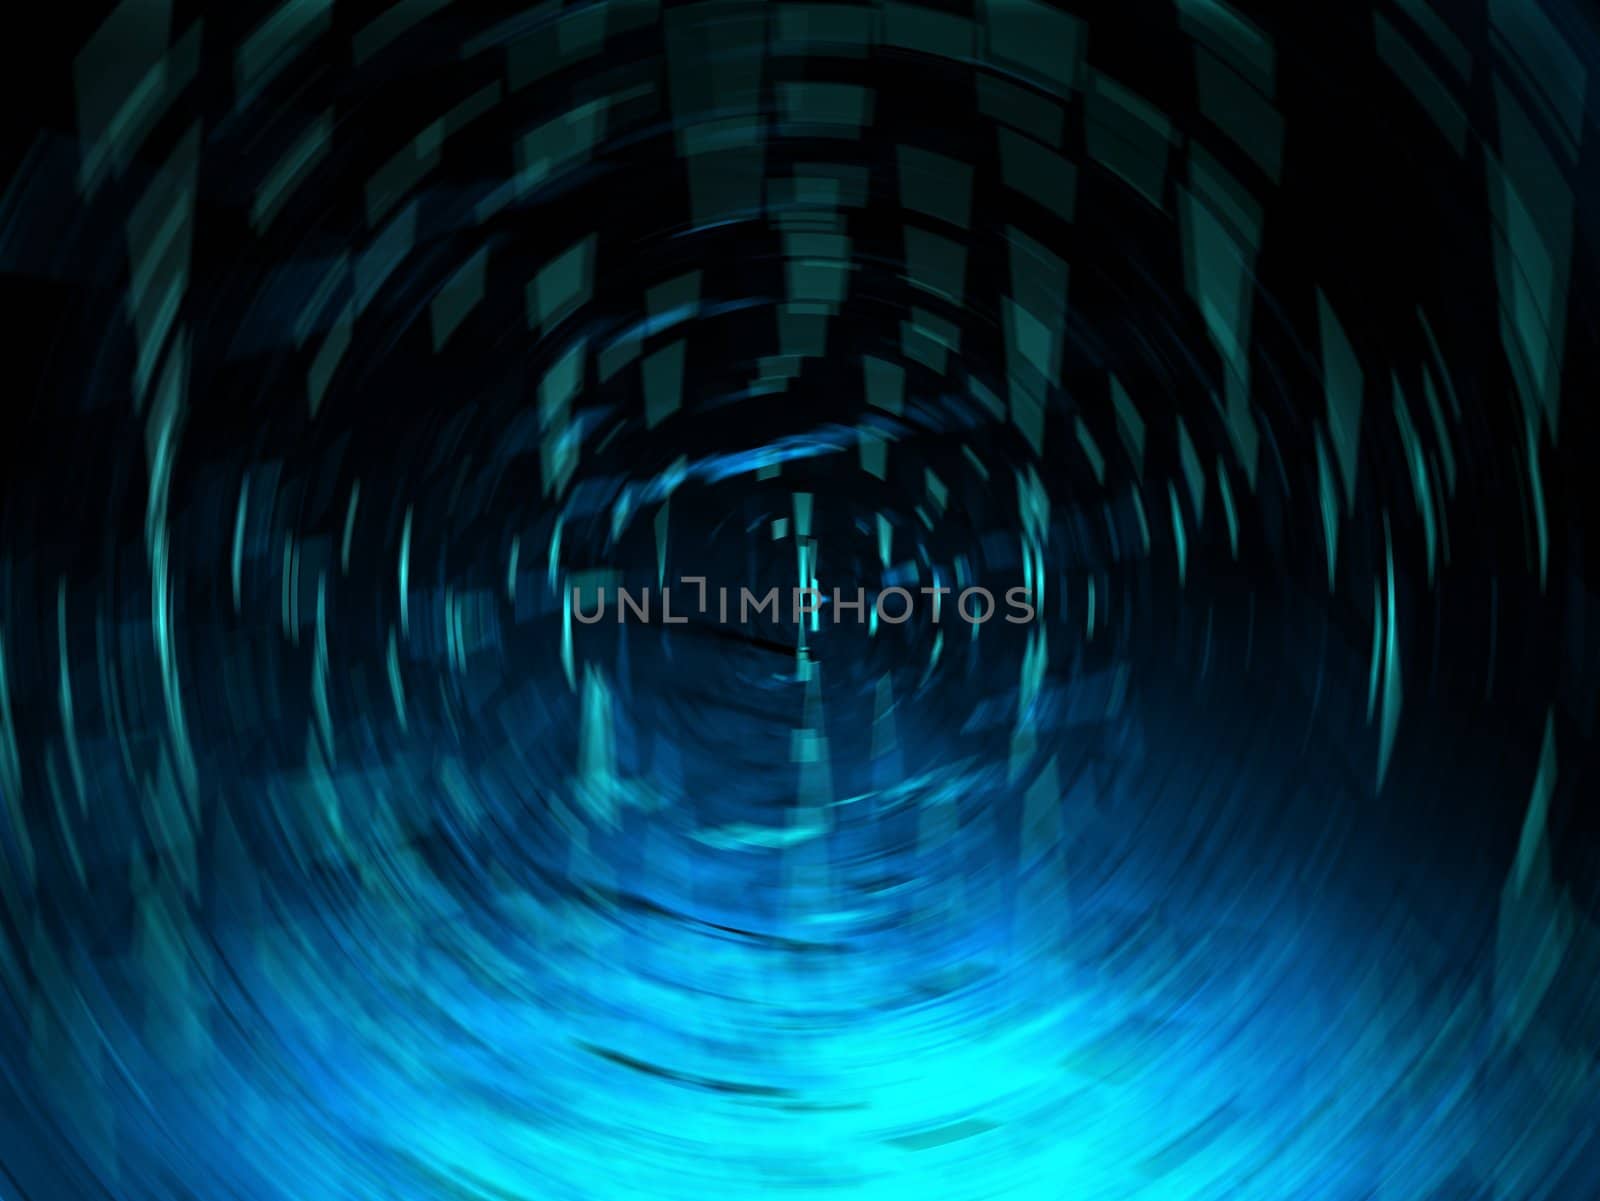 Abstract blue image with spinning motion blur